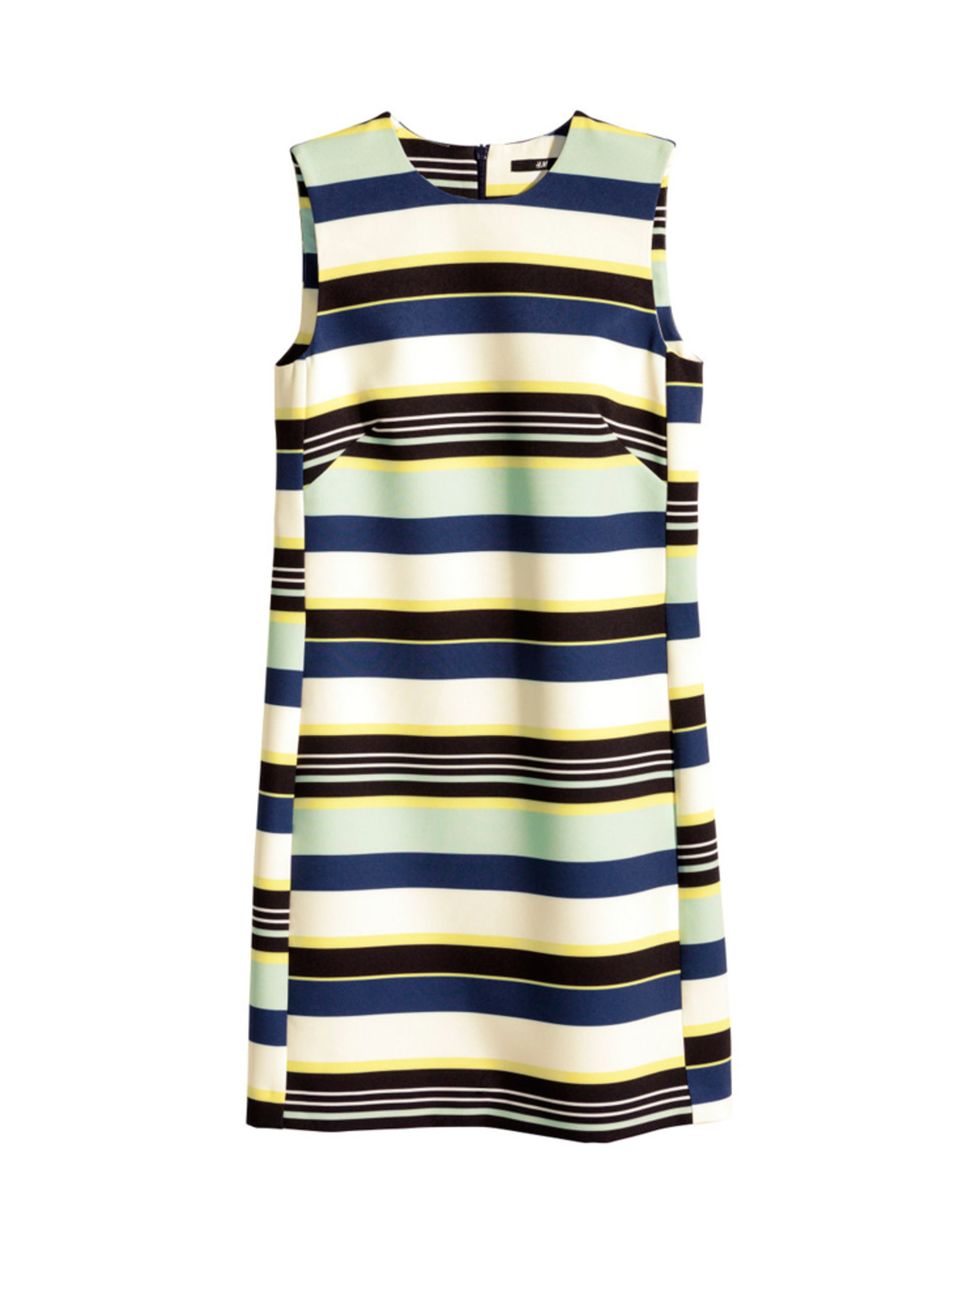 <p><a href="http://www.hm.com/gb/product/88797?article=88797-B" target="_blank">H&M</a> dress, £24.99</p>

<p><a href="http://www.elleuk.com/promotion/twenty-percent-discount-card-hm-elle-magazine-may-2015">Get 20% off at H&M with your May issue of ELLE</